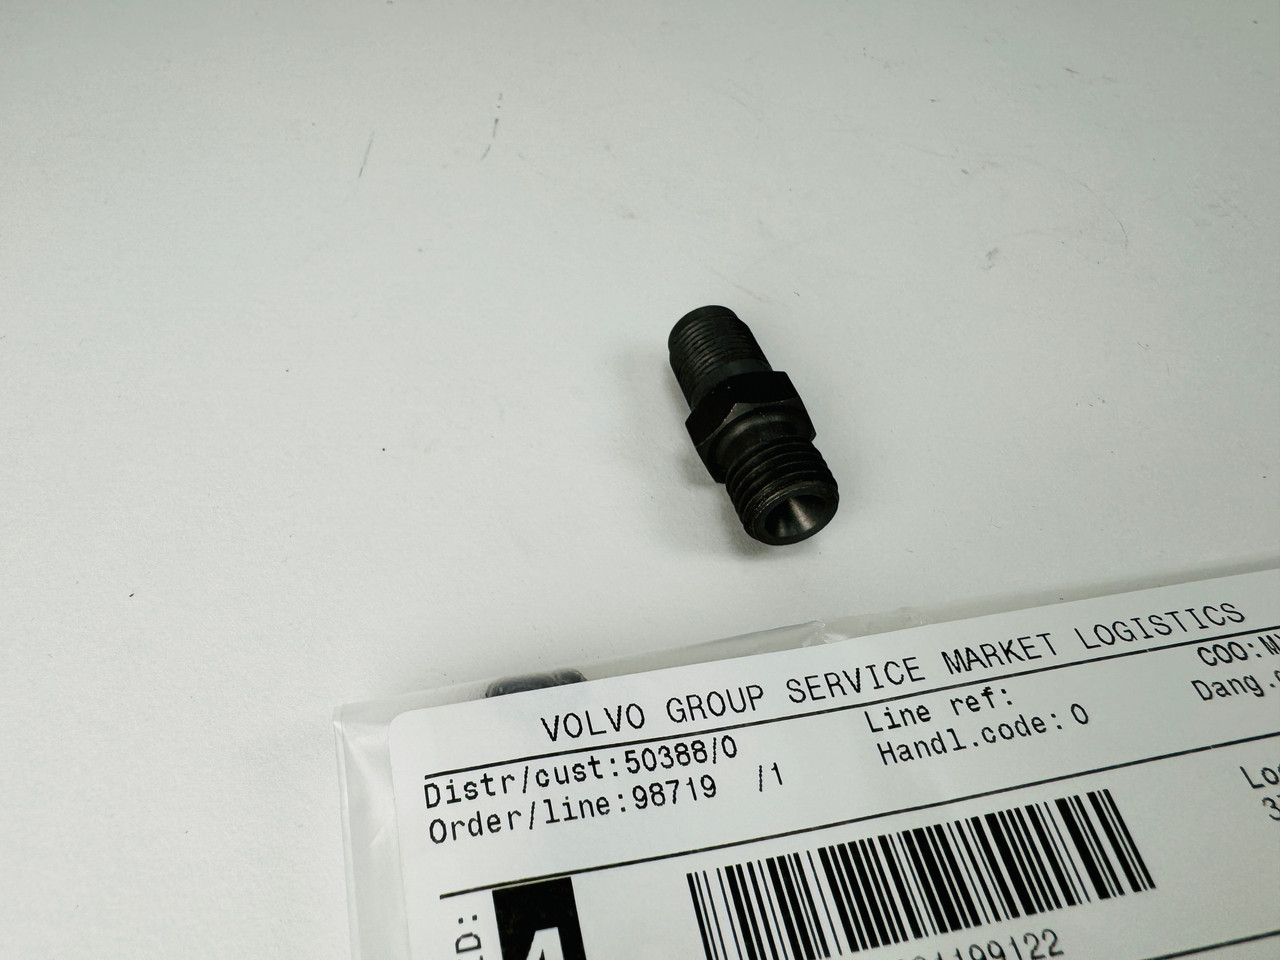 $139.88* GENUINE VOLVO no tax* PRESSURE PIPE CONNECTION 6211991 *Special Order 10 To 14 Days For Delivery